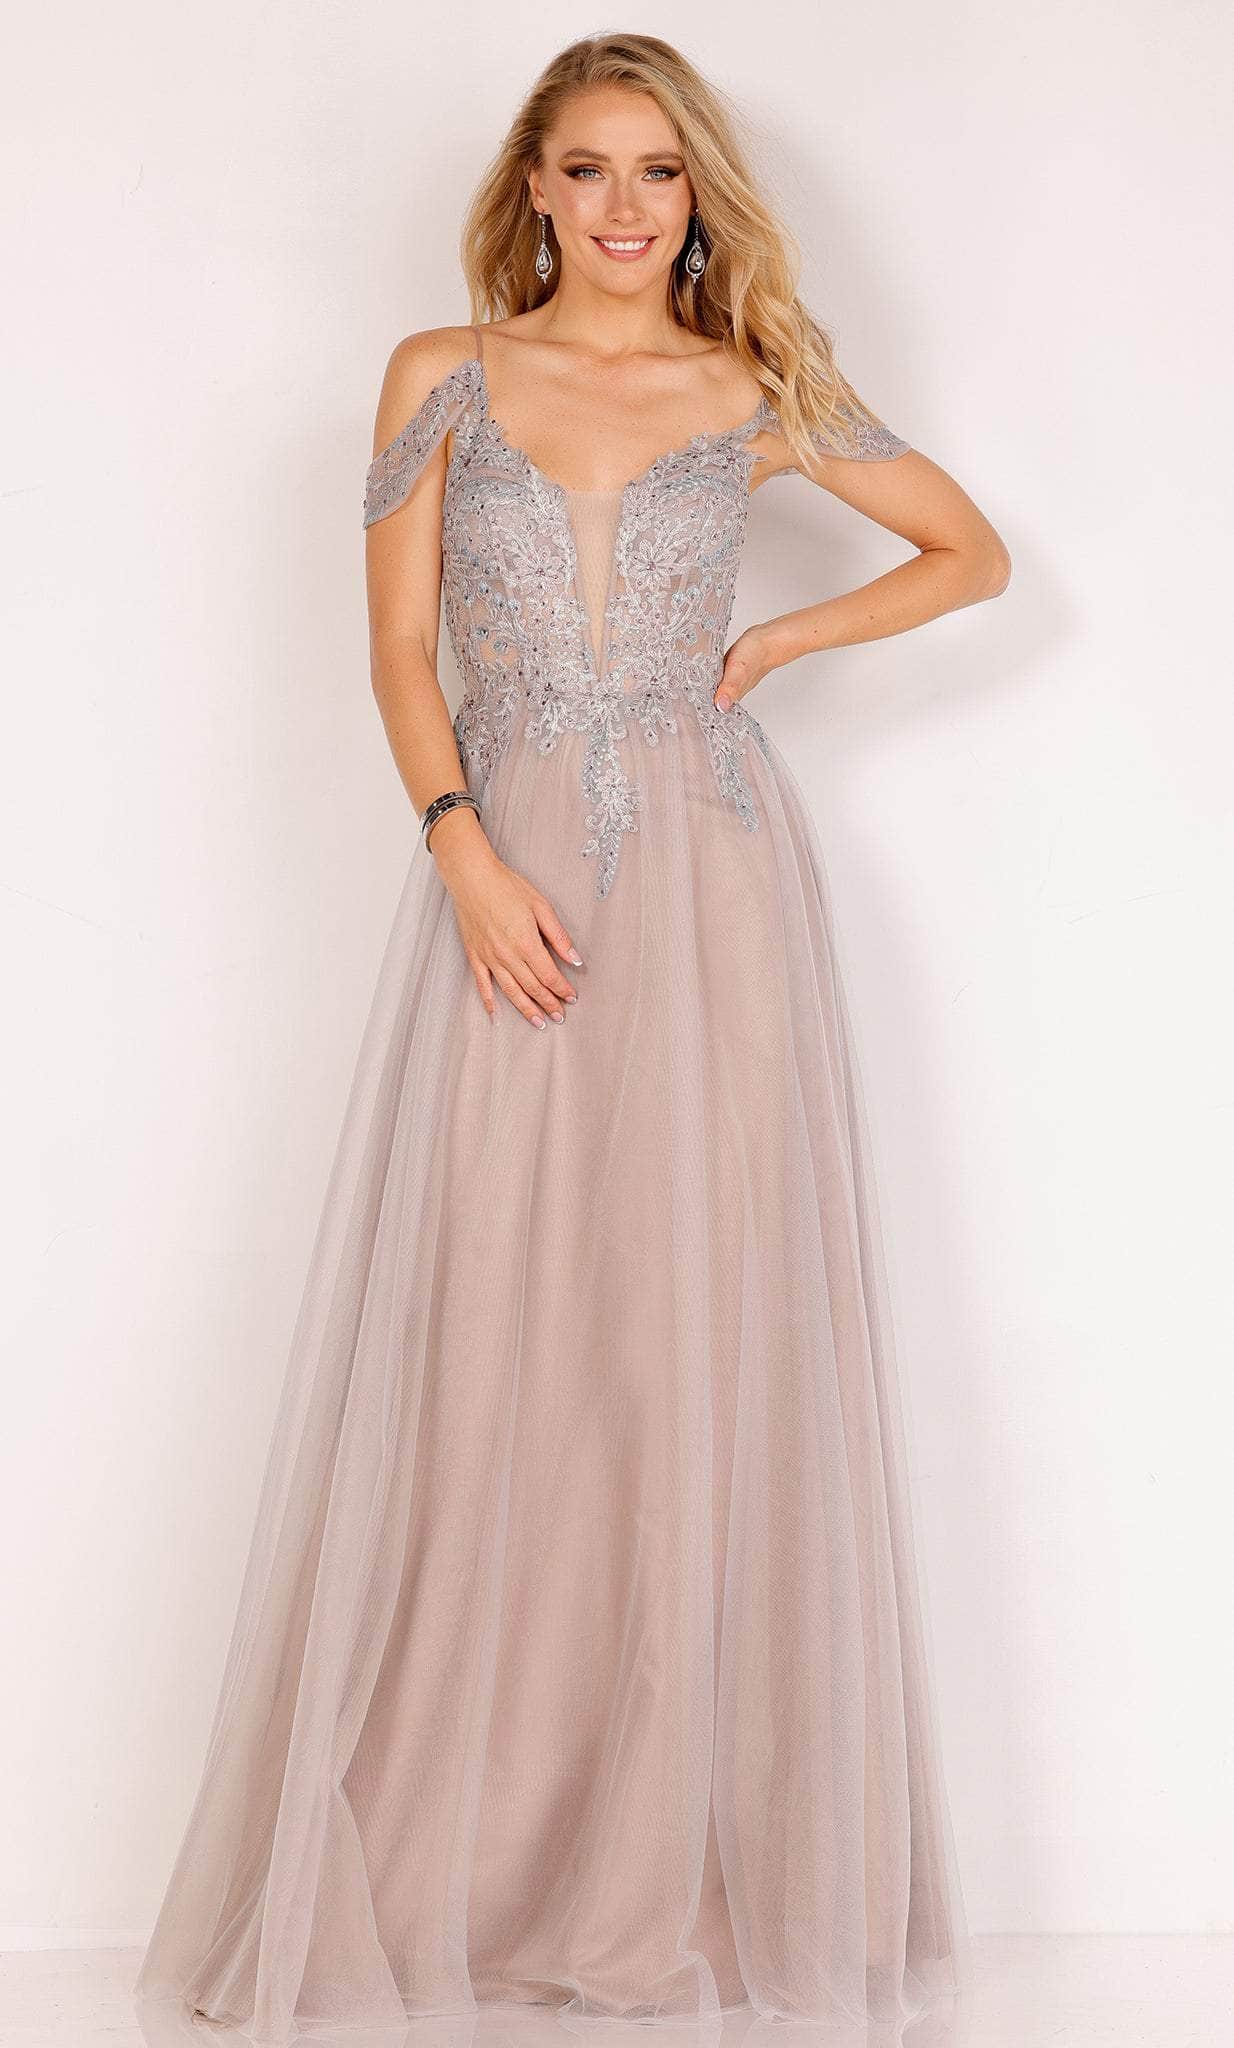 Image of Cecilia Couture 2516 - Cold Shoulder Embellished Bodice Prom Gown